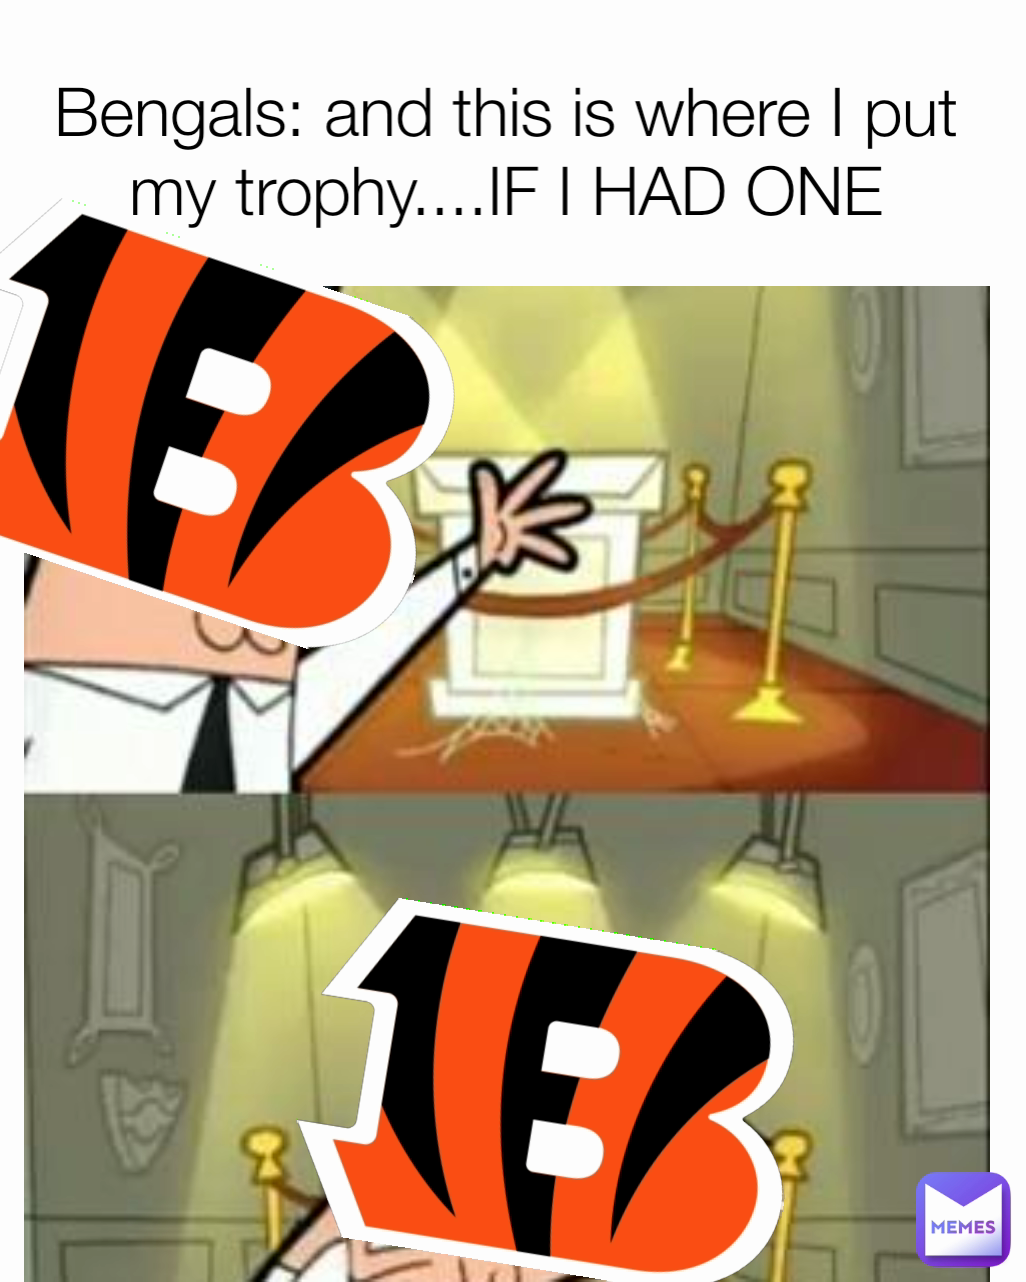 Bengals: and this is where I put my trophy....IF I HAD ONE